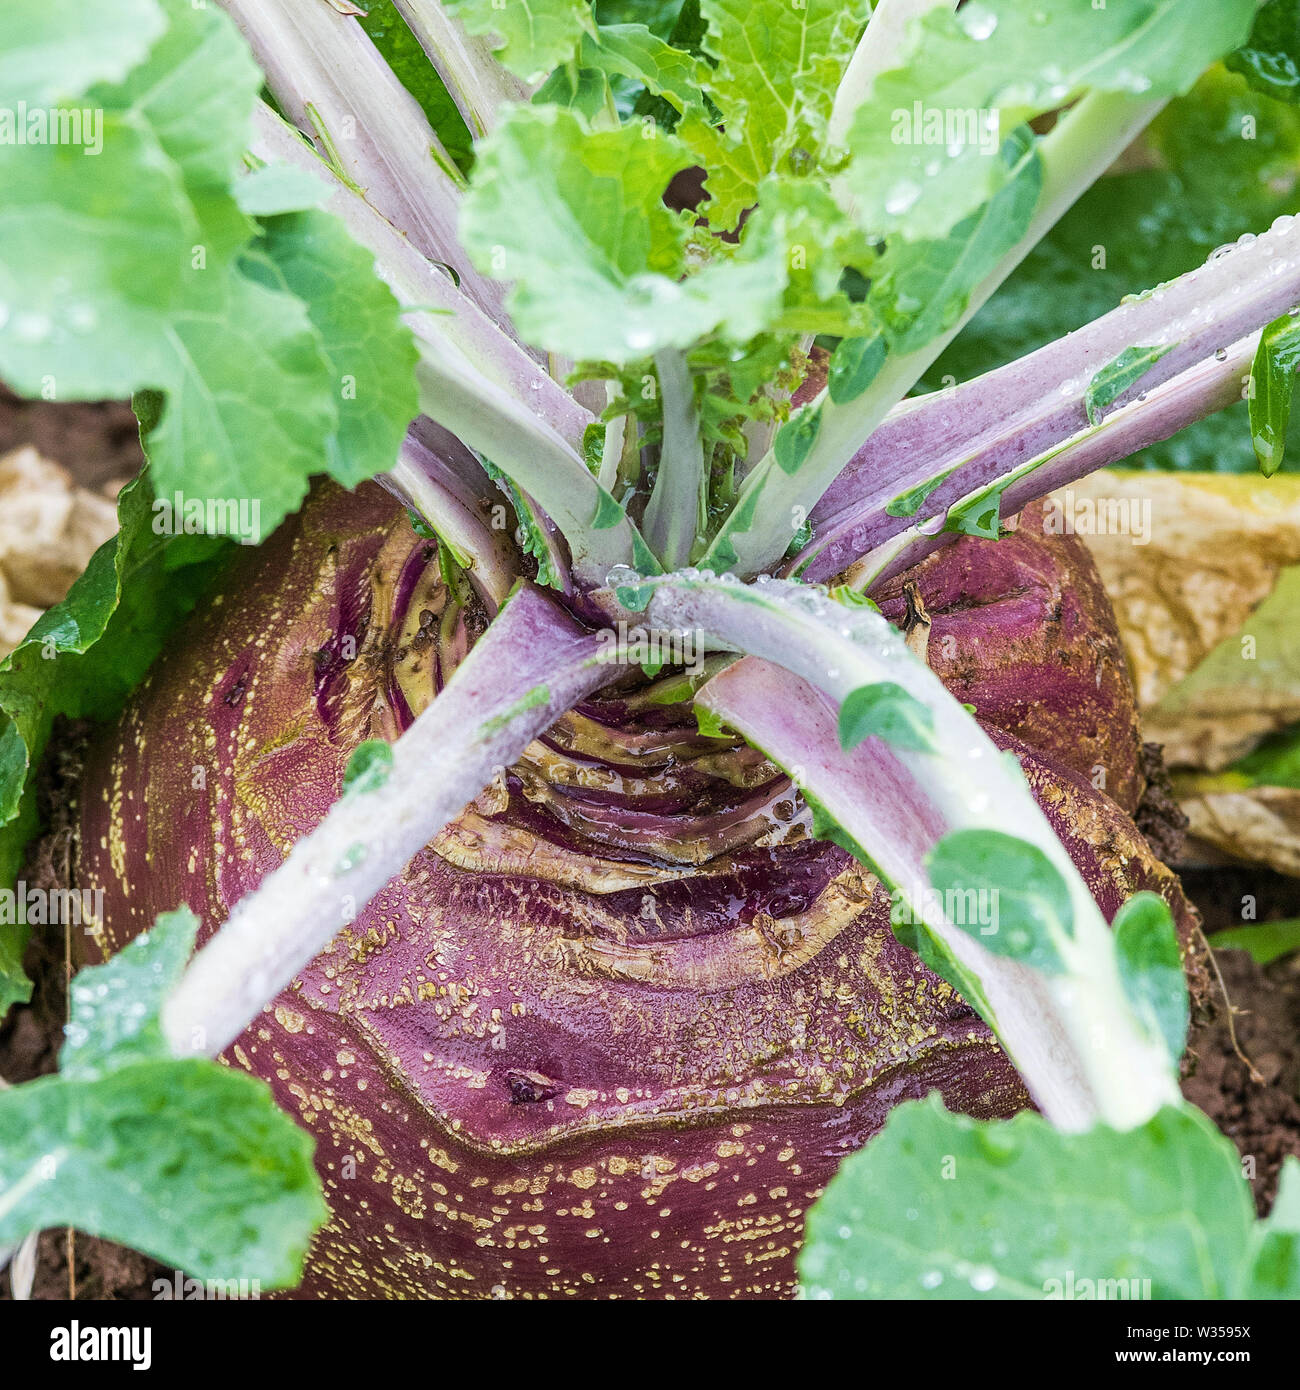 Swede/rutabaga in the soil, showing the leaves and root Stock Photo